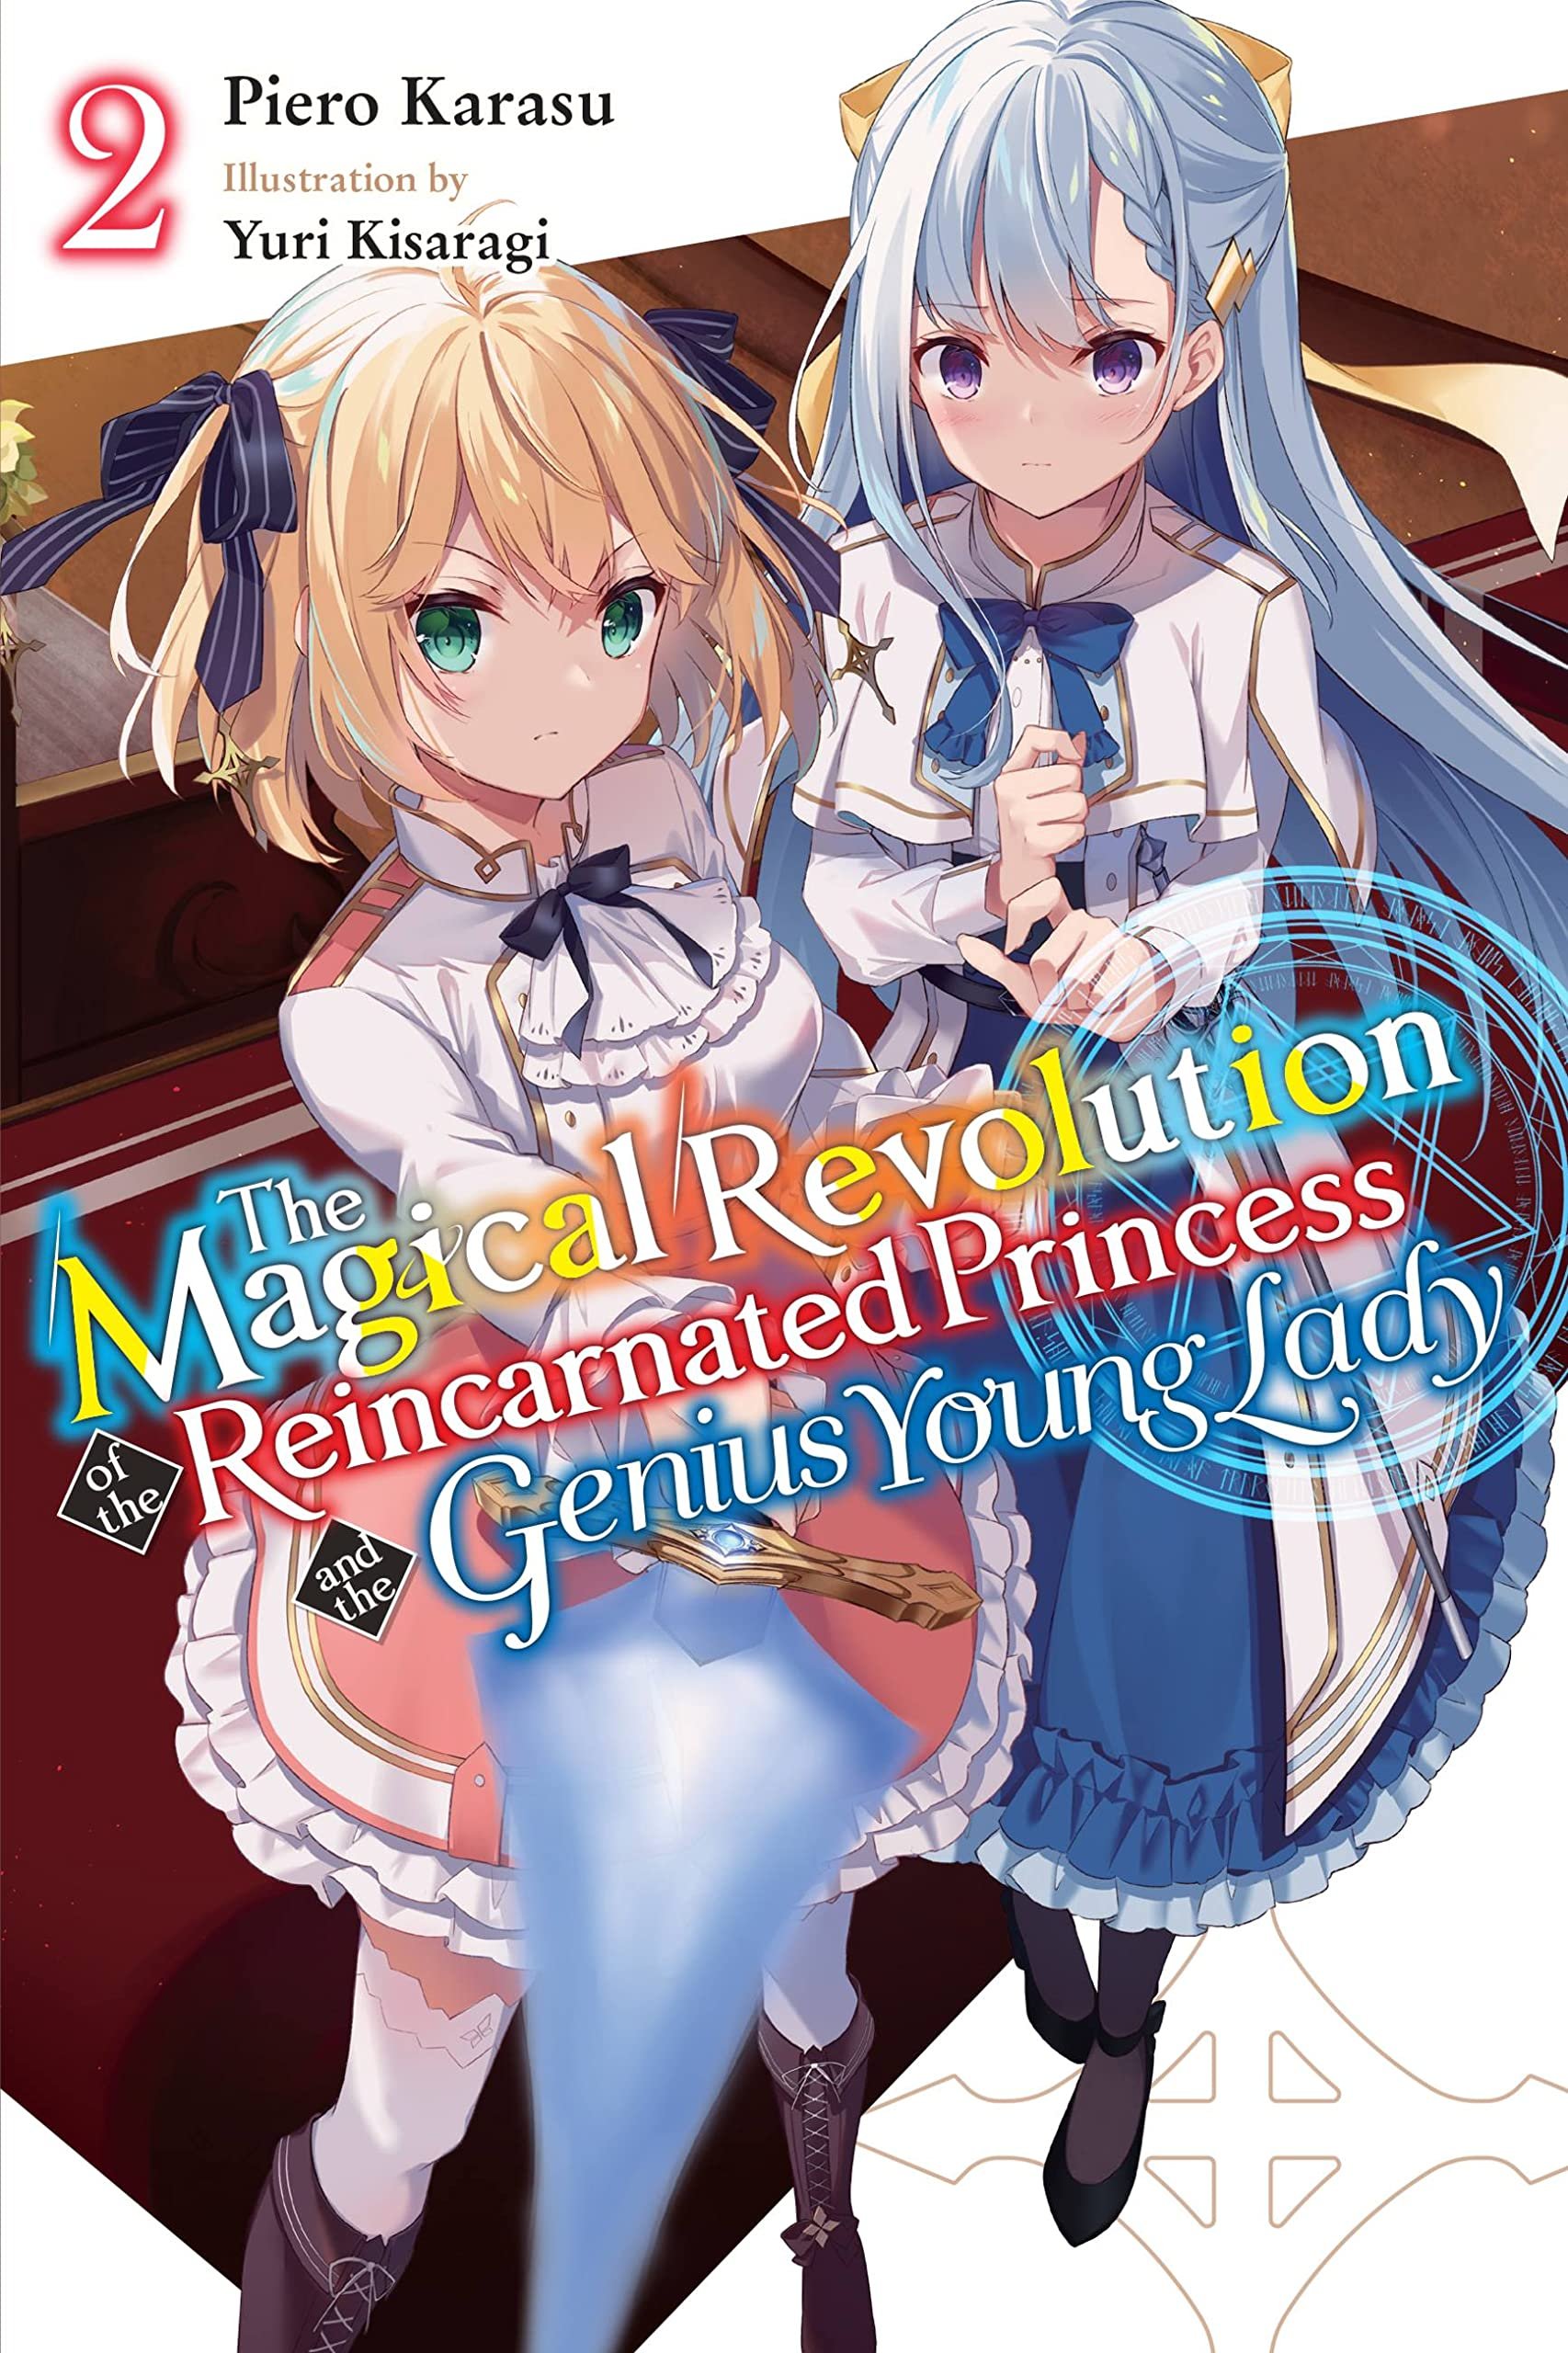 Anime Reign Volume 2 Issue 1 by World Anime Club - Issuu